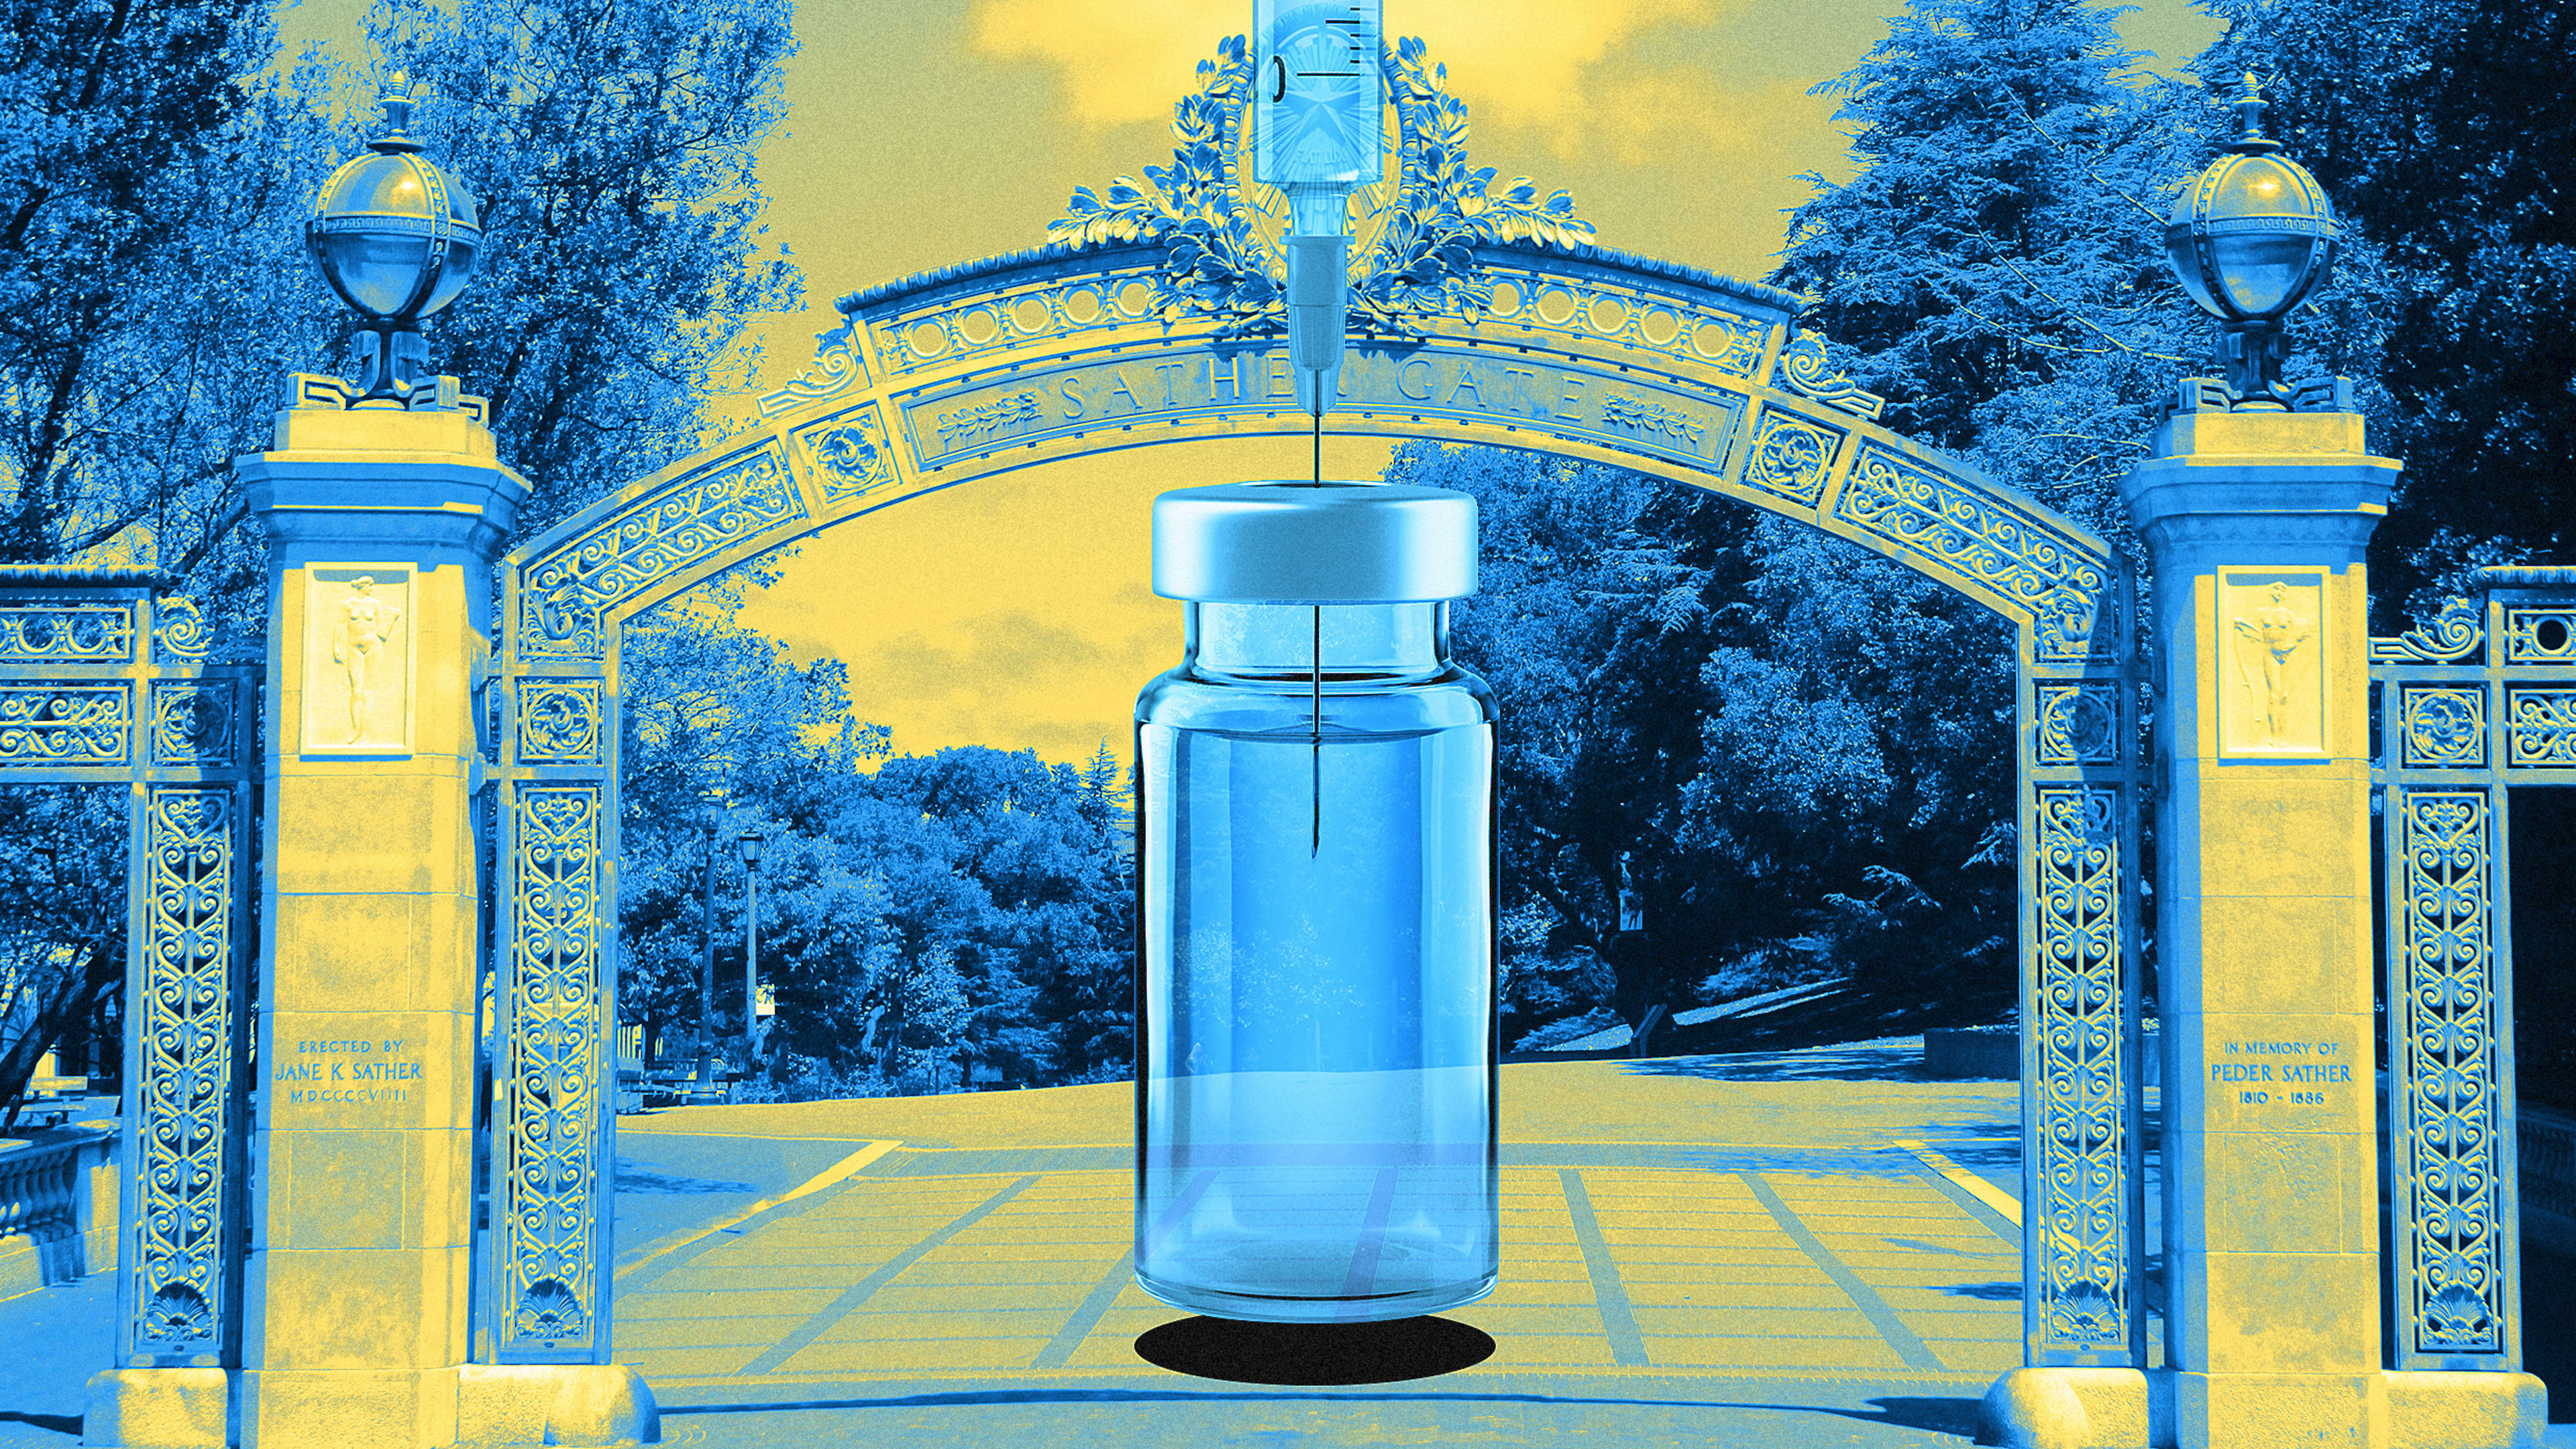 If college campuses are embracing vaccine mandates, businesses should, too